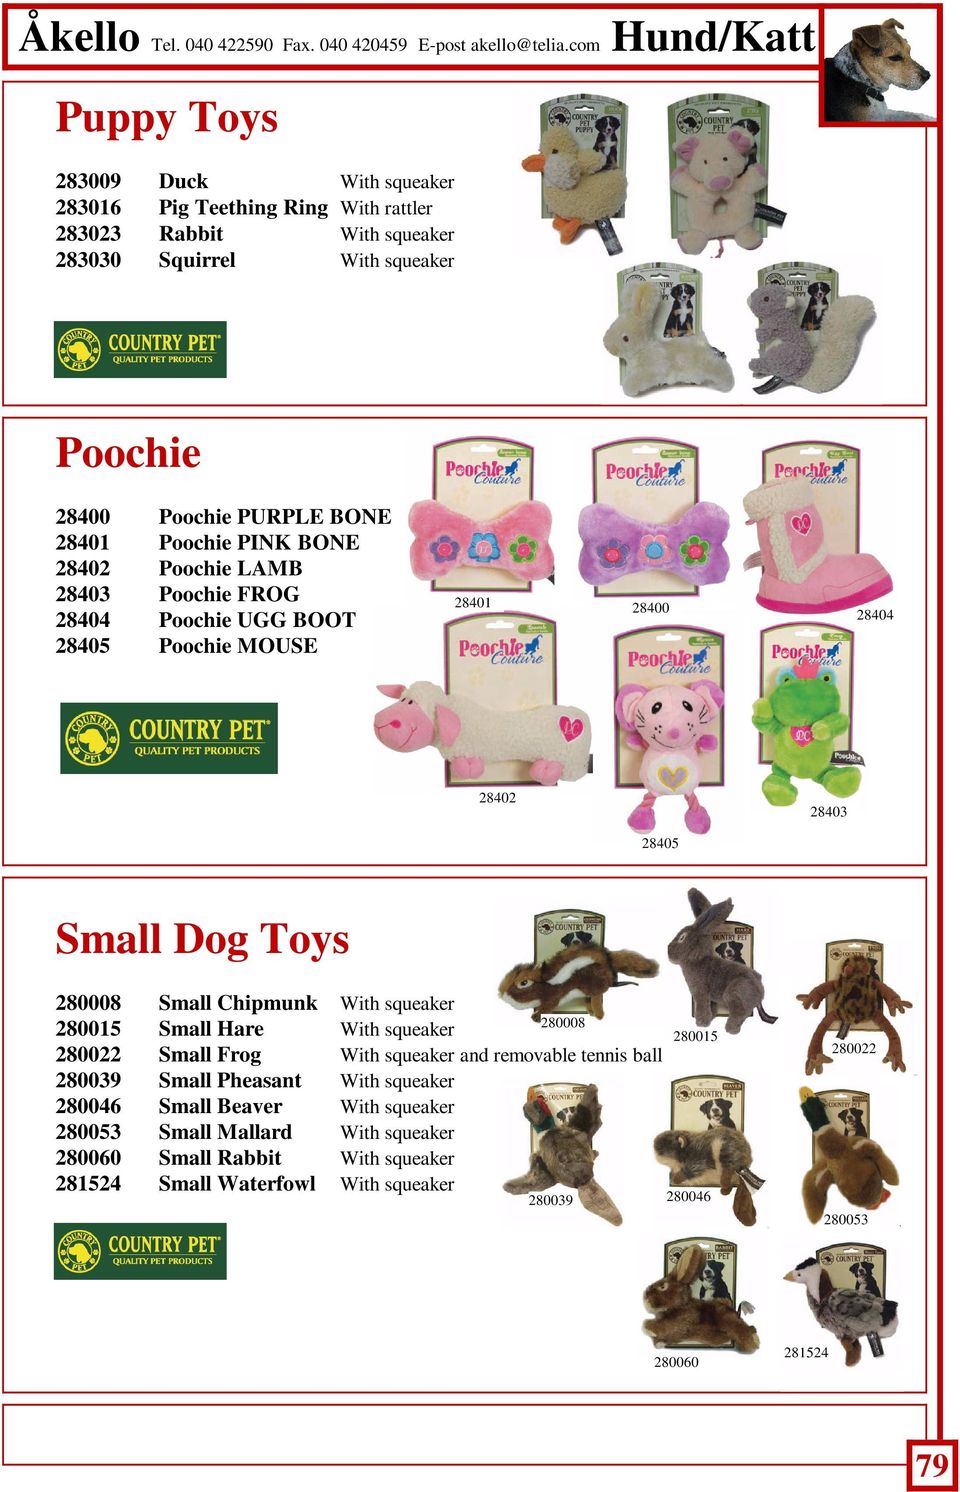 Poochie PINK BONE 28402 Poochie LAMB 28403 Poochie FROG 28404 Poochie UGG BOOT 28405 Poochie MOUSE 28401 28400 28404 28402 28403 28405 Small Dog Toys 280008 Small Chipmunk With squeaker